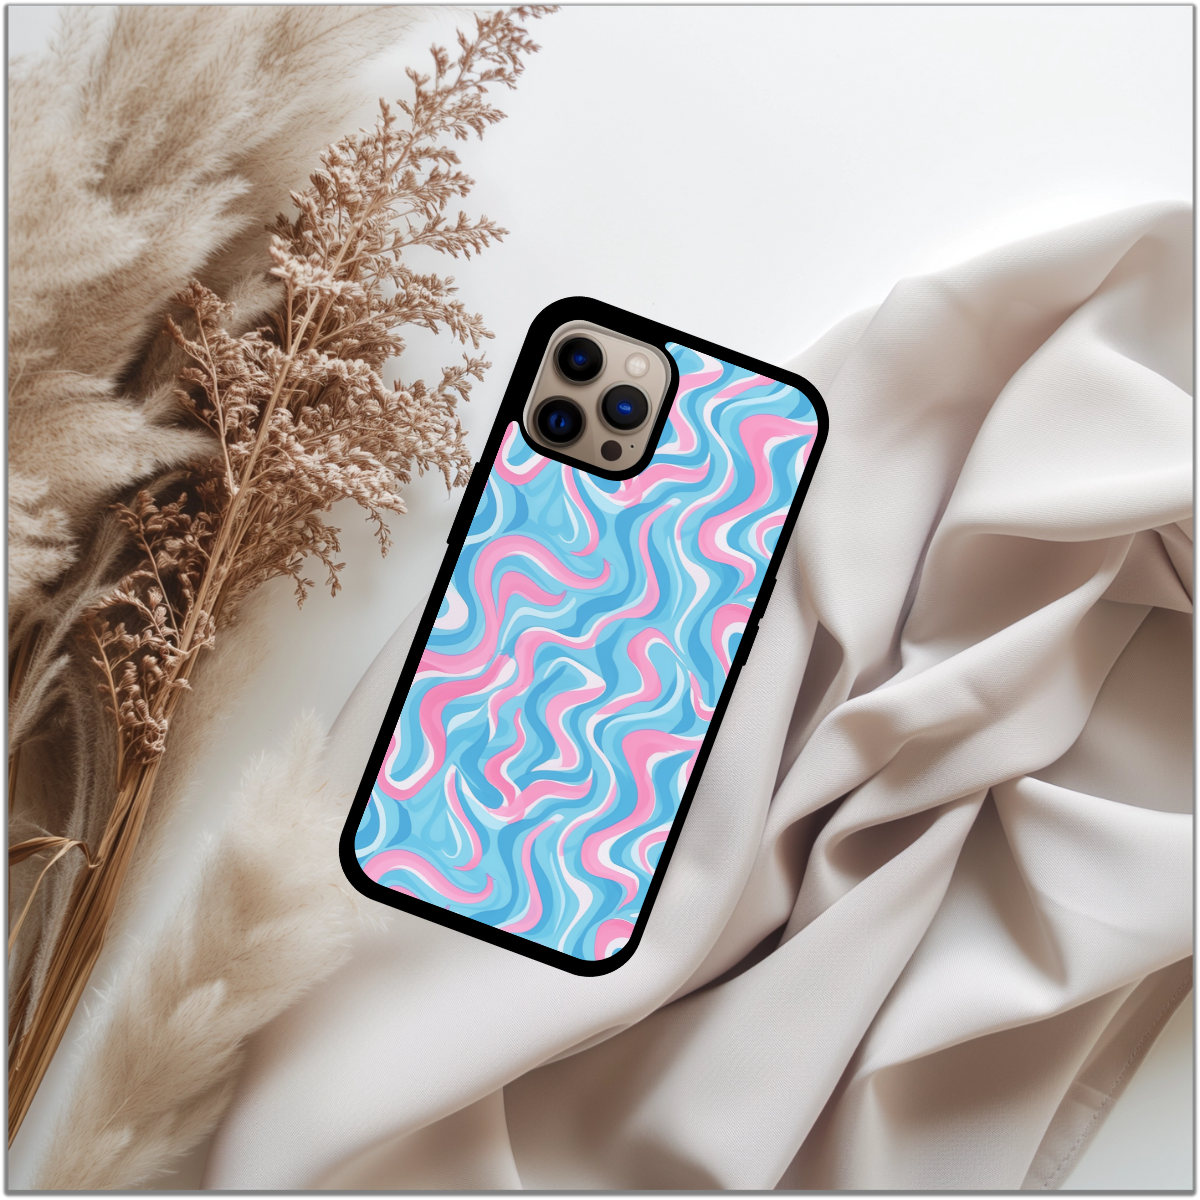 Pink Waves phone case perfect gift for her - cute phone case - best birthday gift - iphone case - girly phone case - pretty phone case - Pink phone case